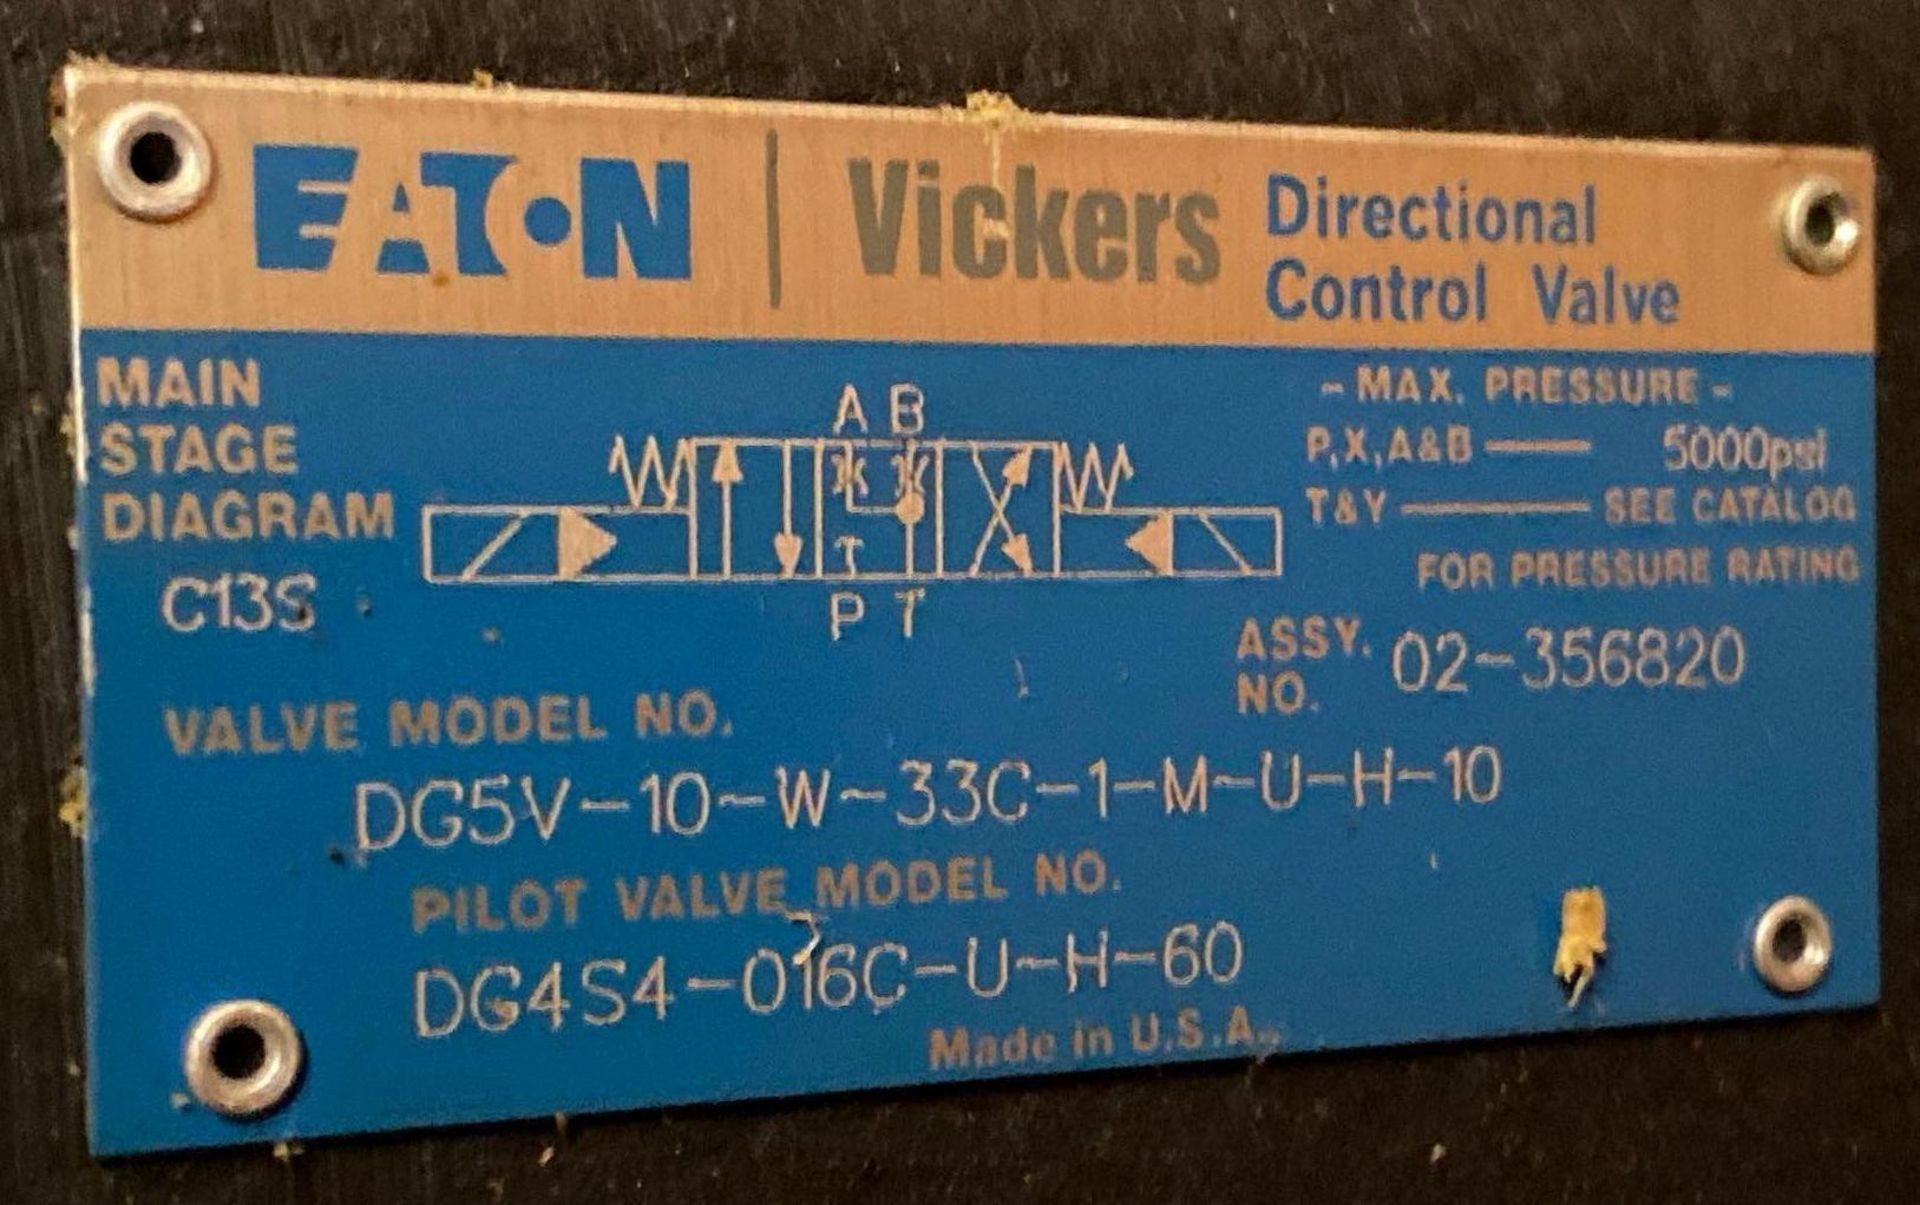 Eaton Vickers Directional Control Valve - Image 3 of 4